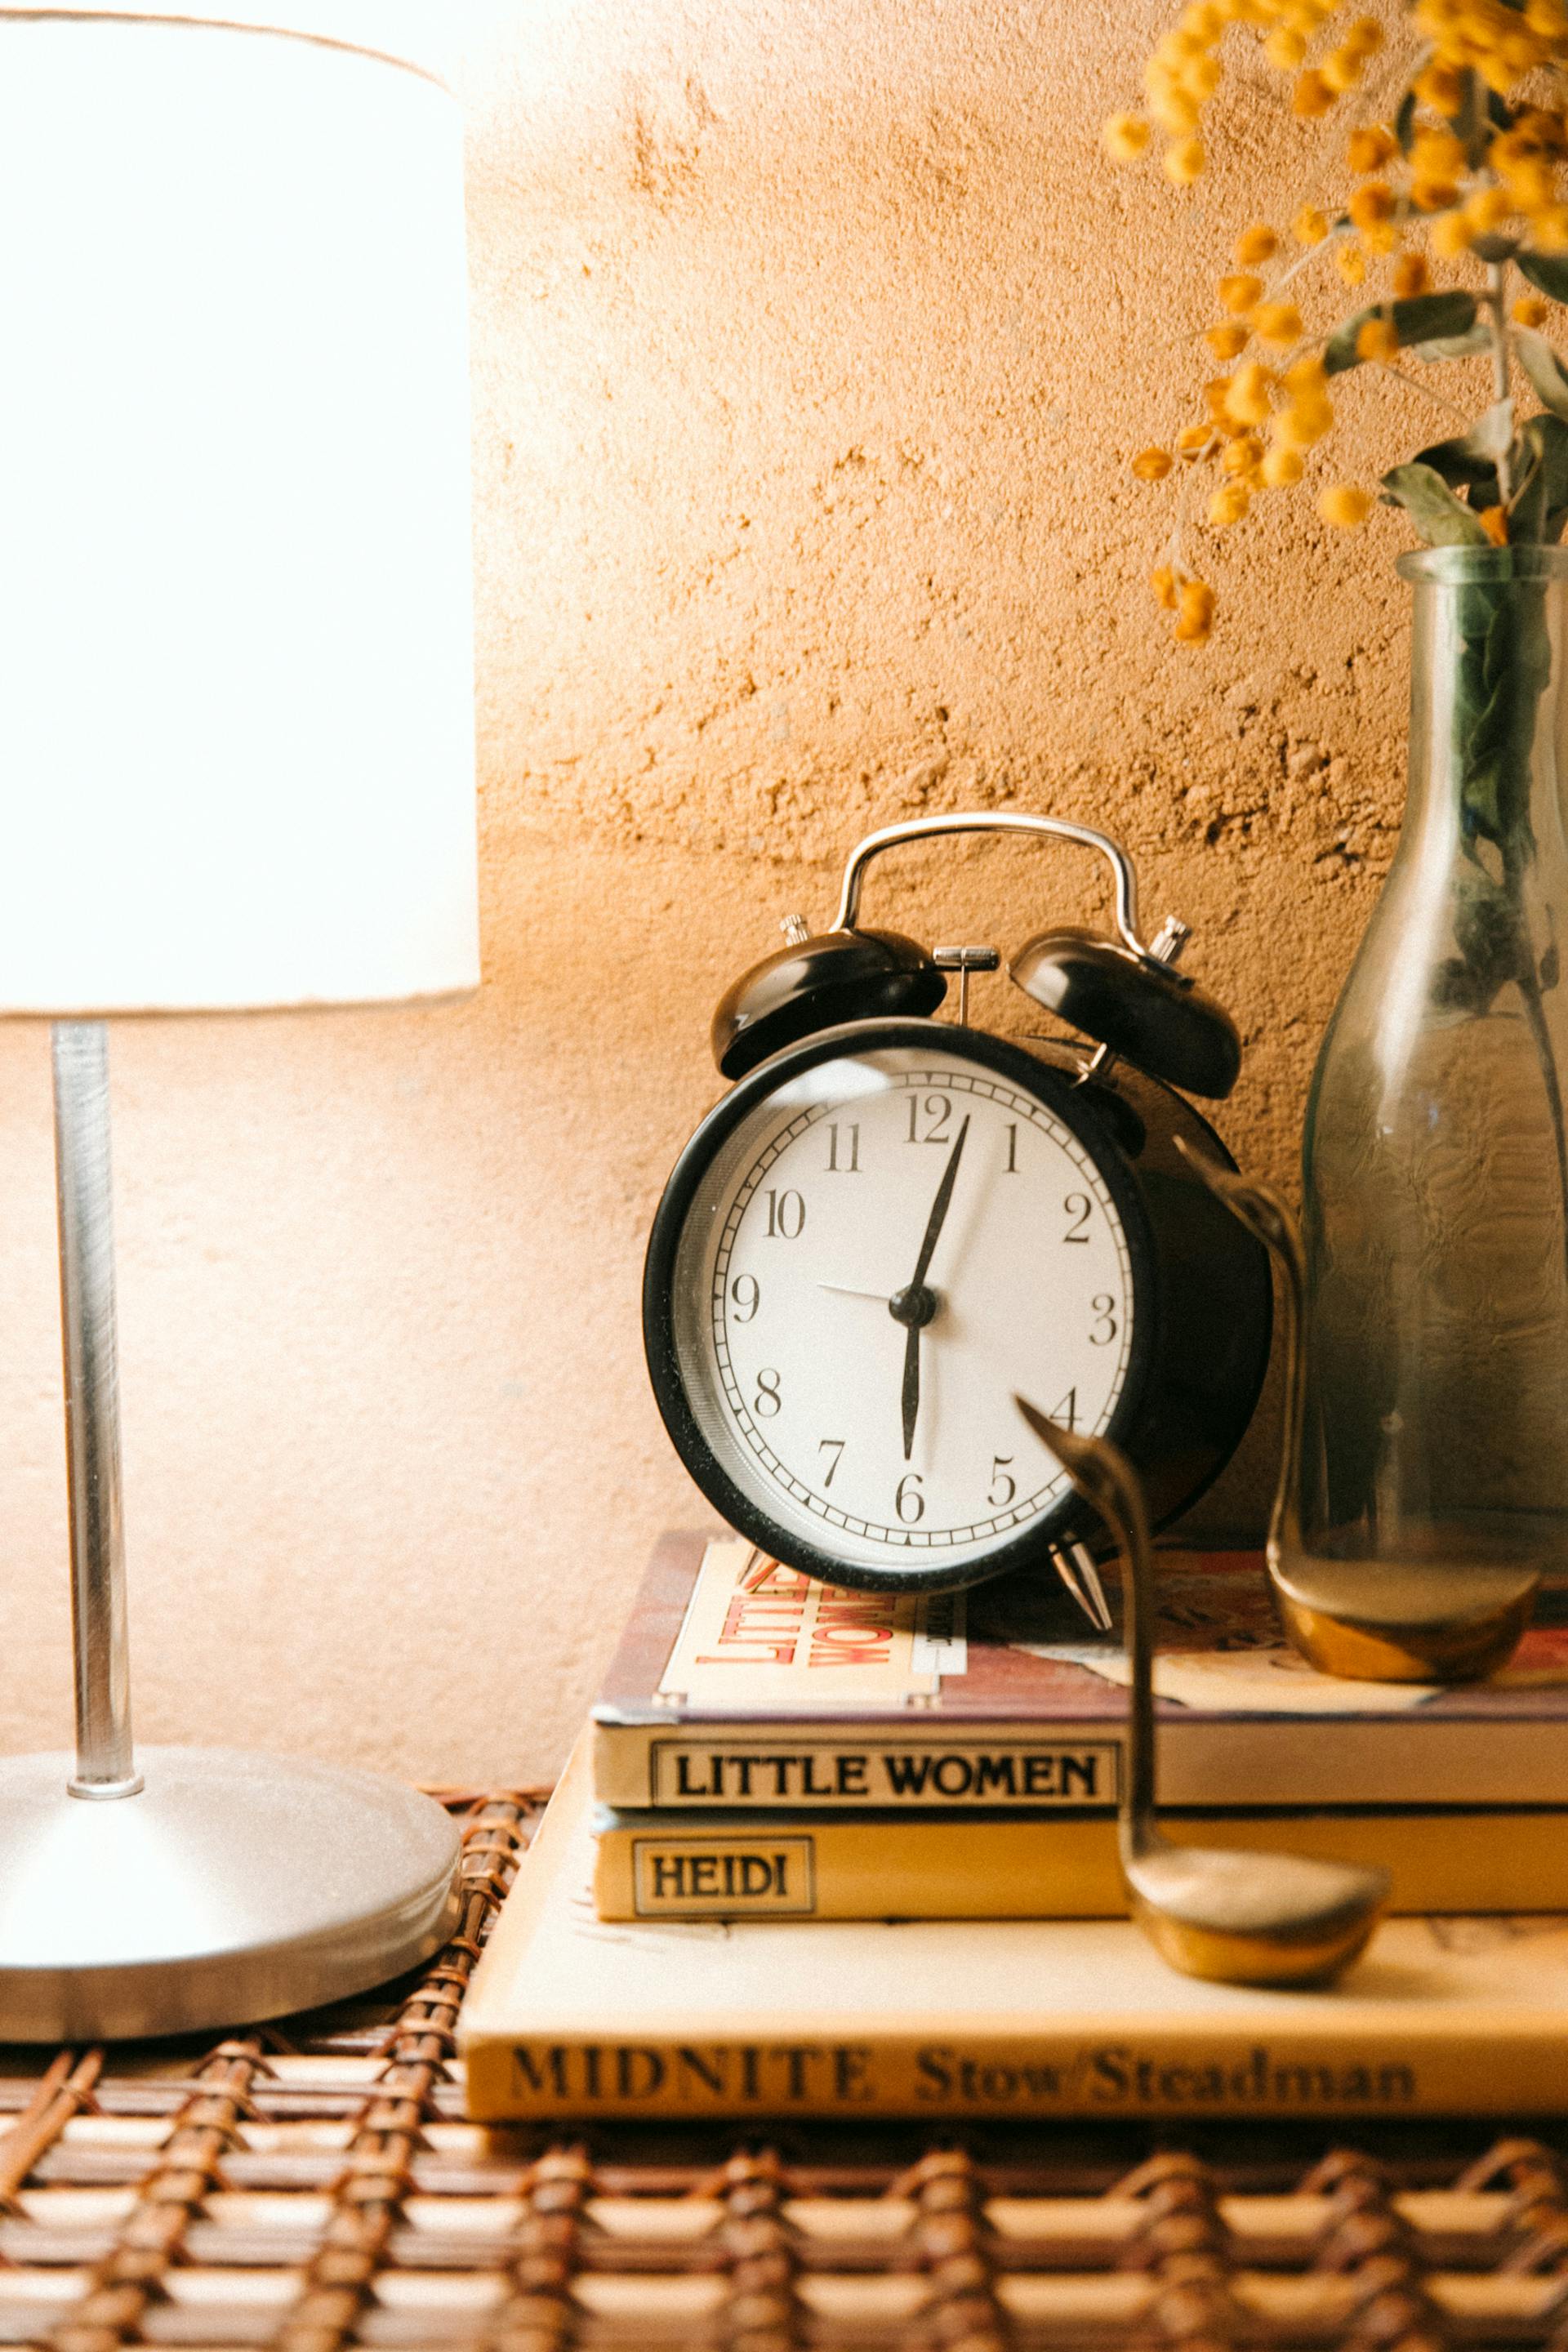 A vintage alarm clock and luminous lamp placed on a bedside table | Source: Pexels